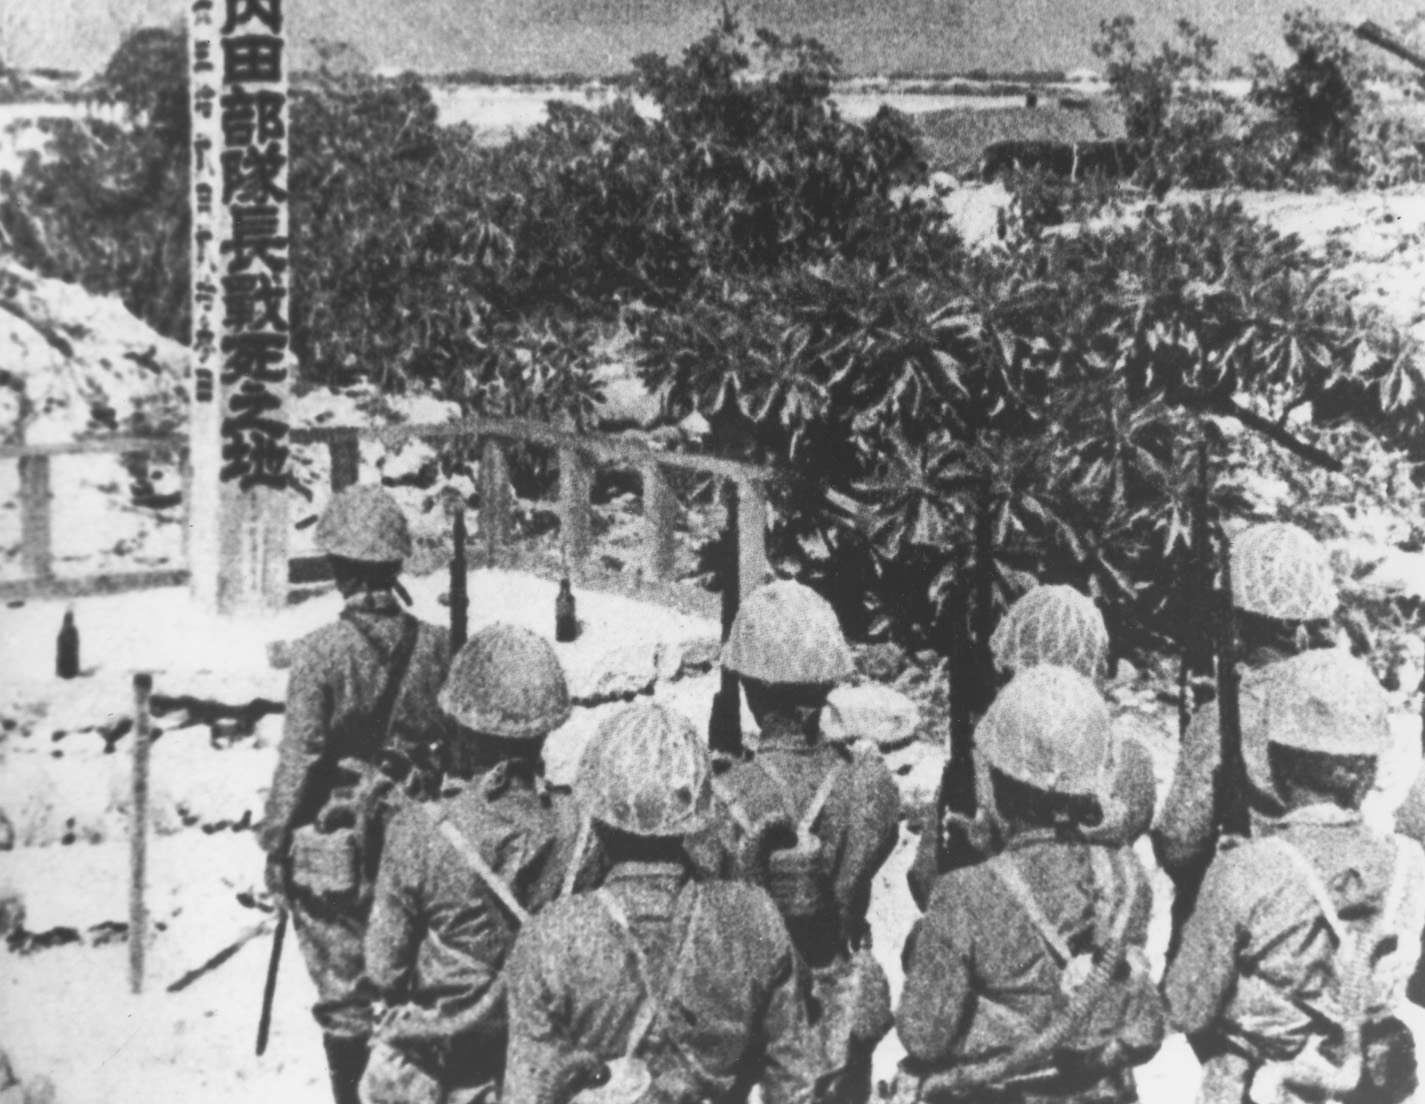 Japanese troops pay respect to a fellow soldier killed in action on Wake.